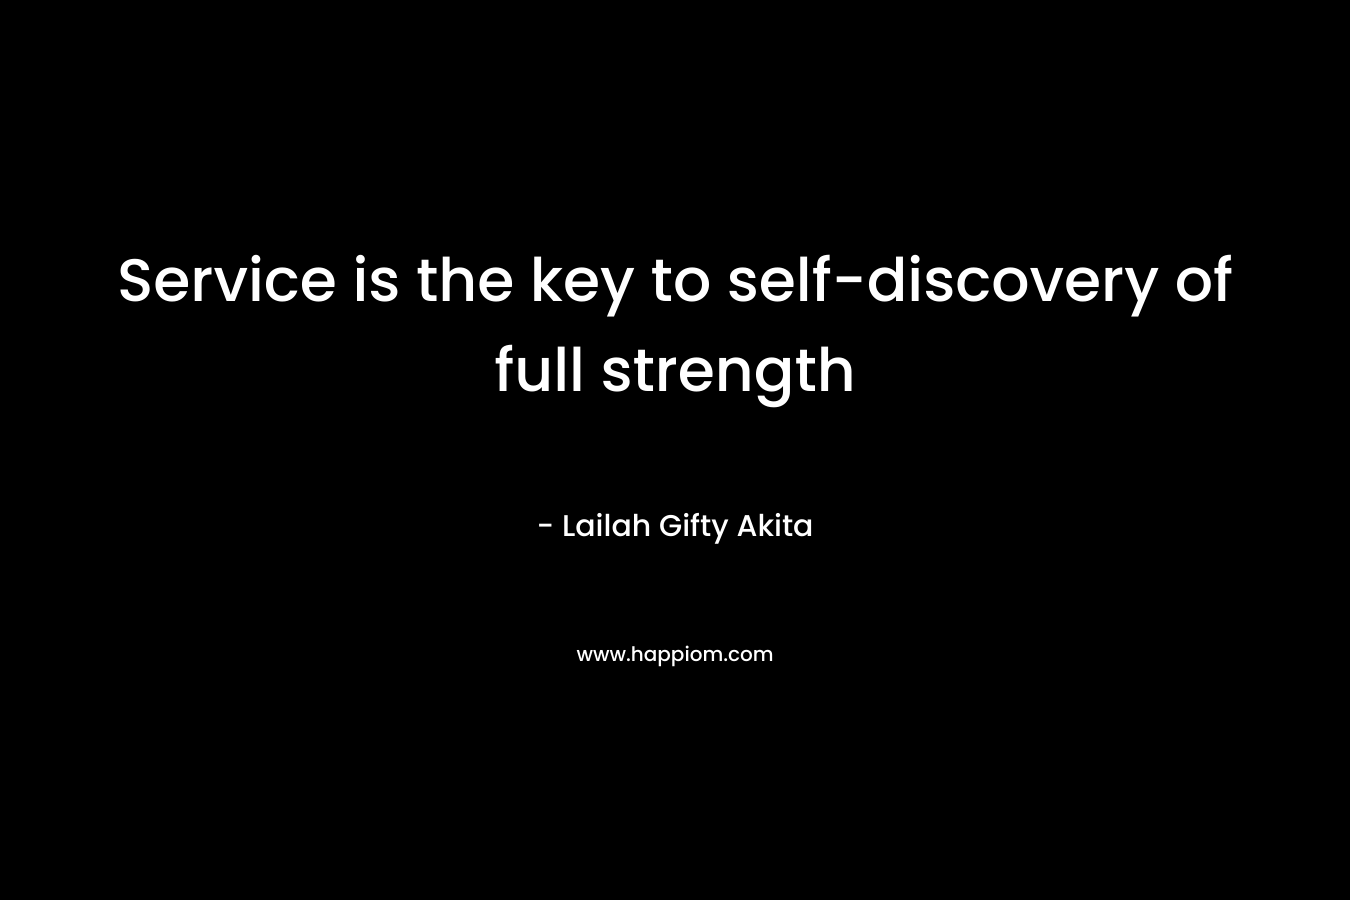 Service is the key to self-discovery of full strength